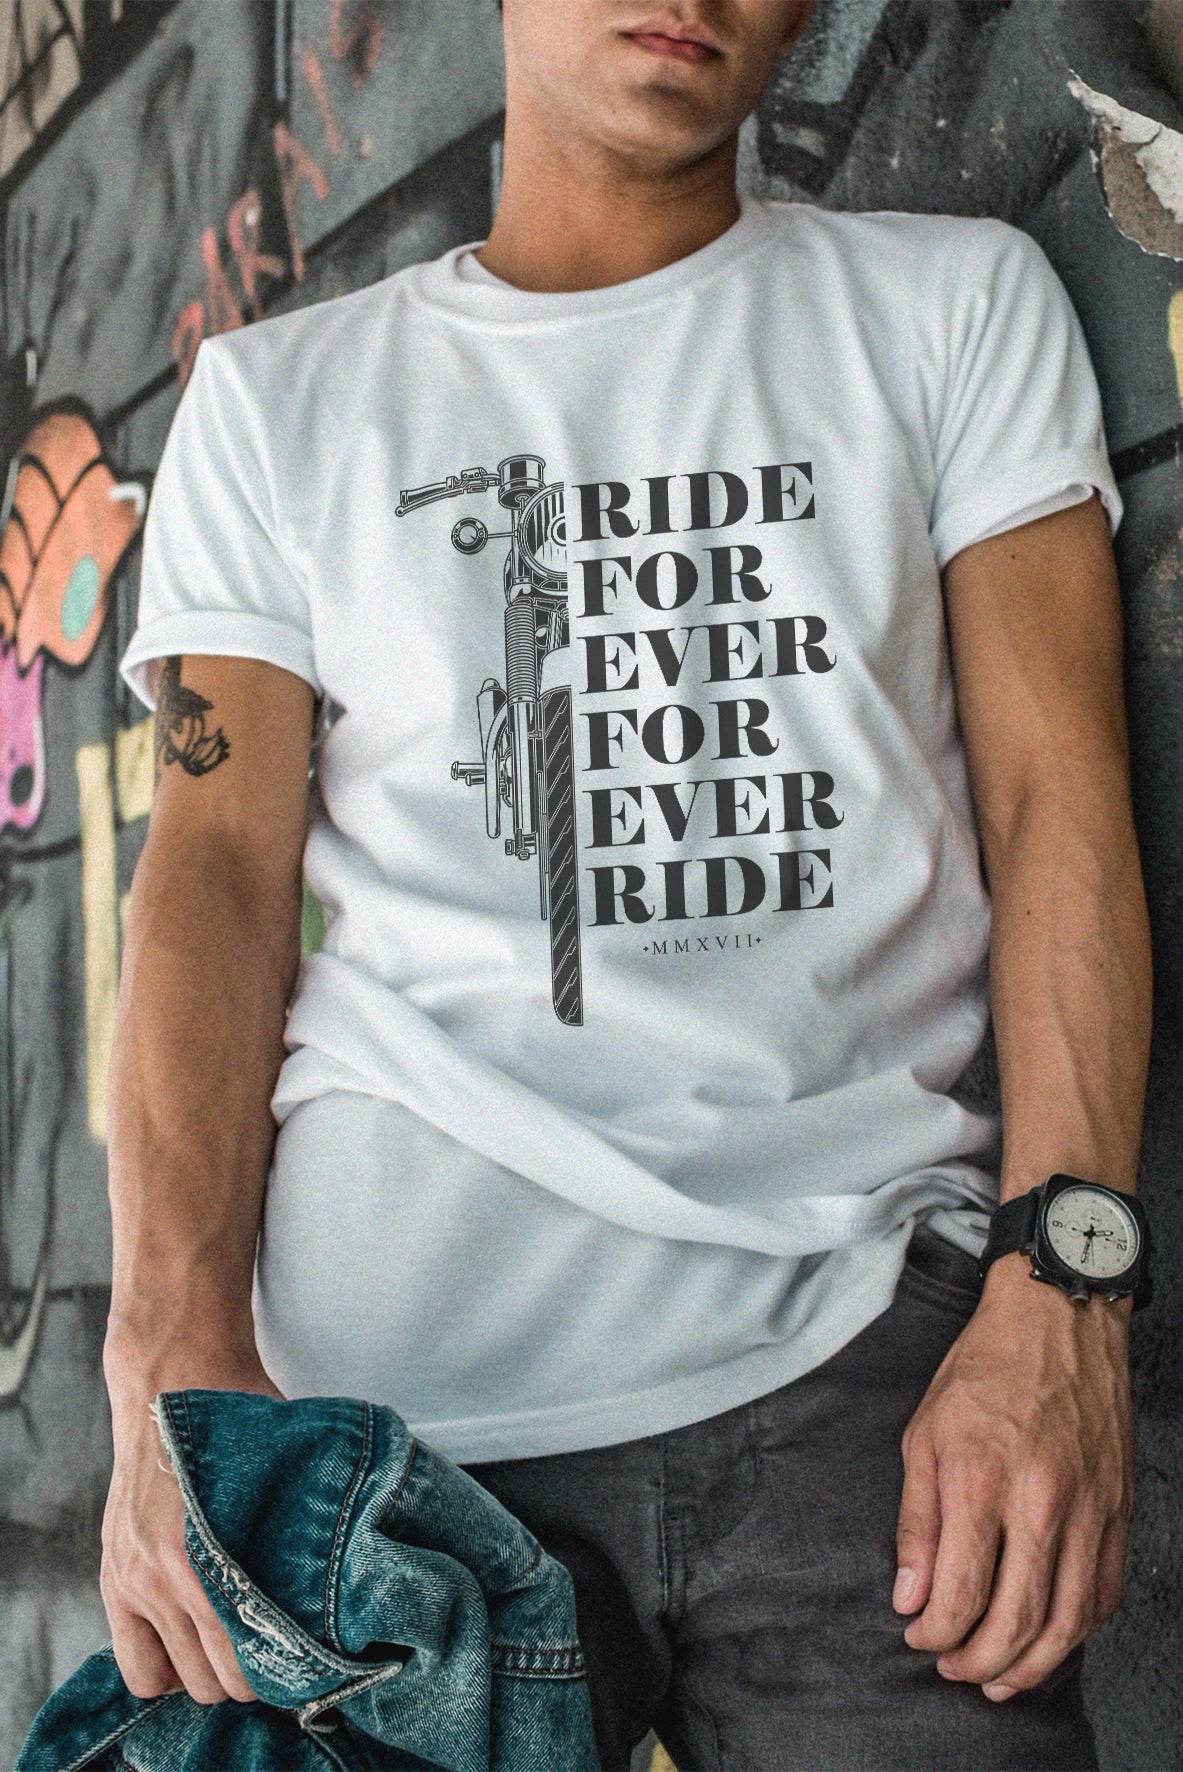 T-shirt "RIDE FOR EVER"